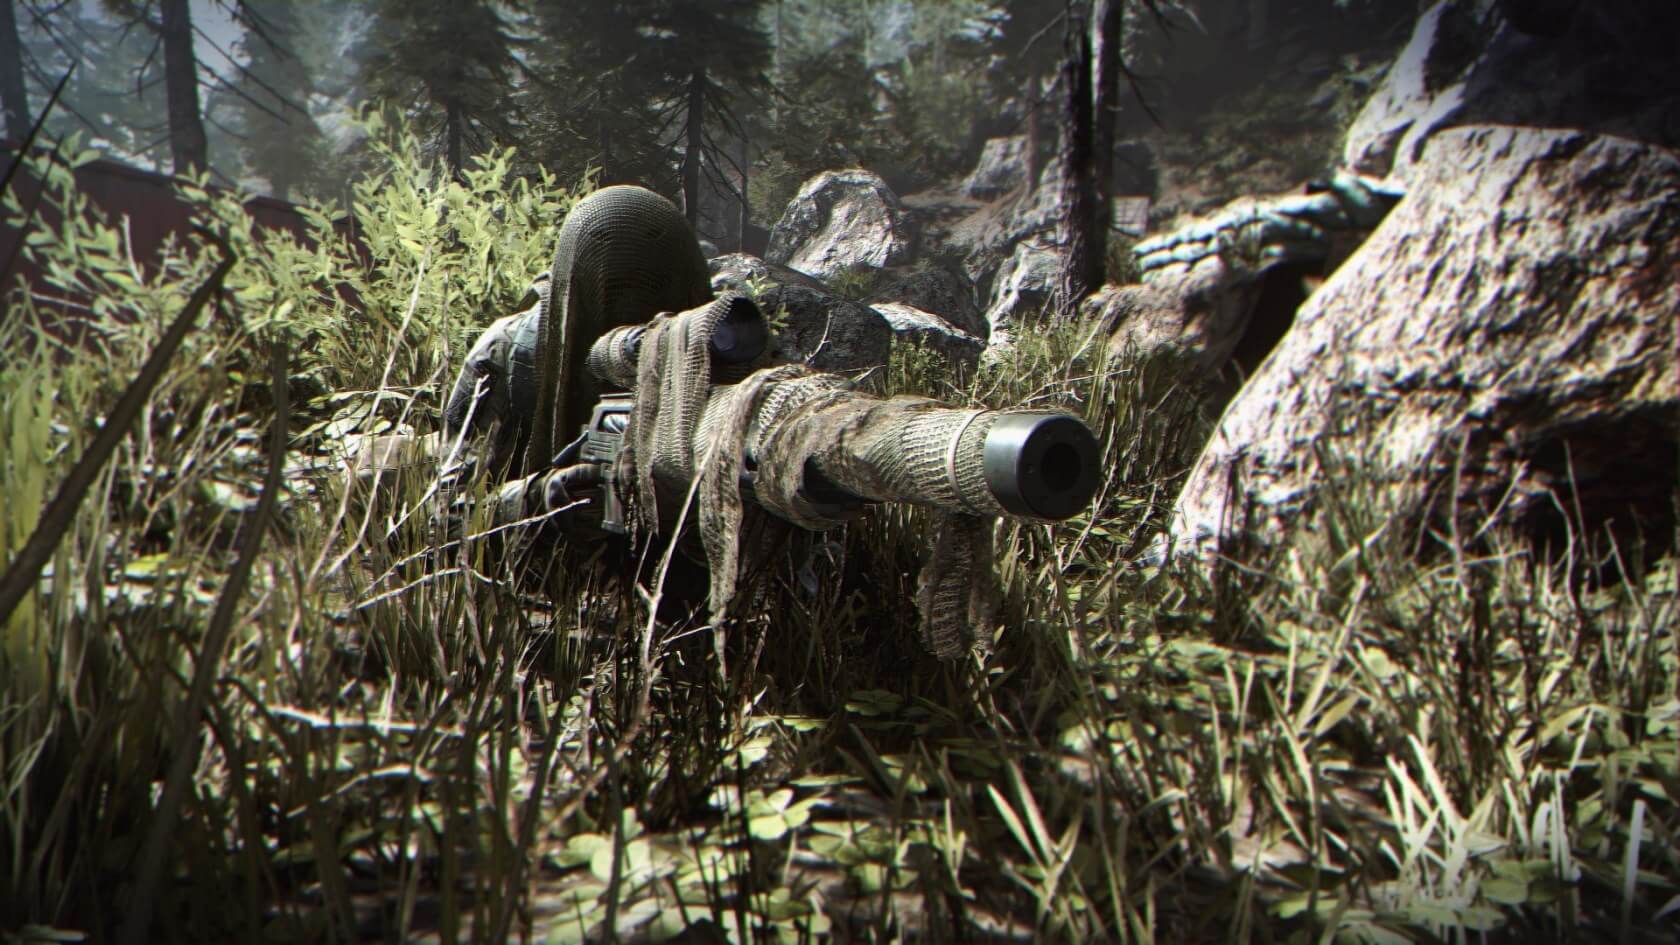 Call of Duty: Modern Warfare will receive a post-launch 'Battle Pass' system instead of loot boxes